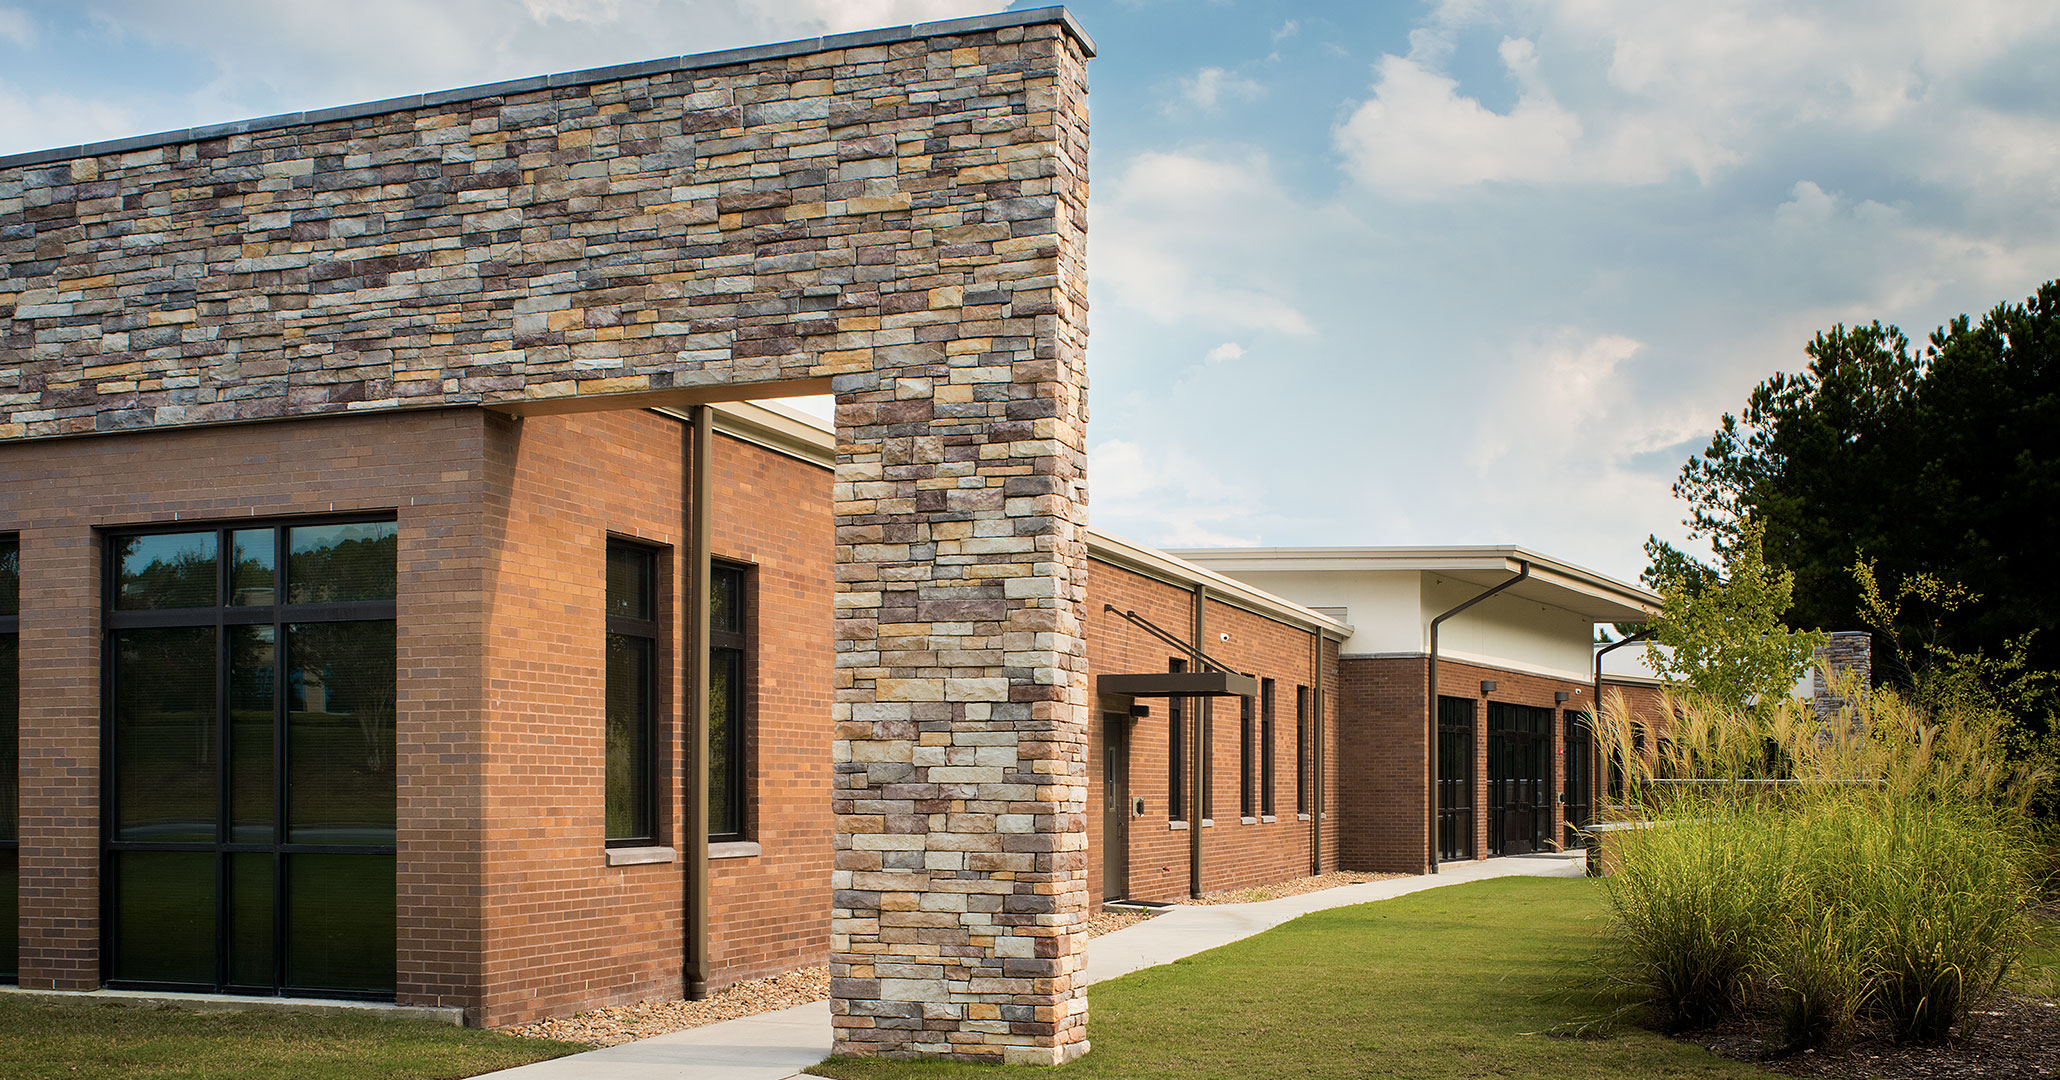 Boudreaux architects worked with the Richland County Recreation Commission to modernize the exterior of RCRC Headquarters.